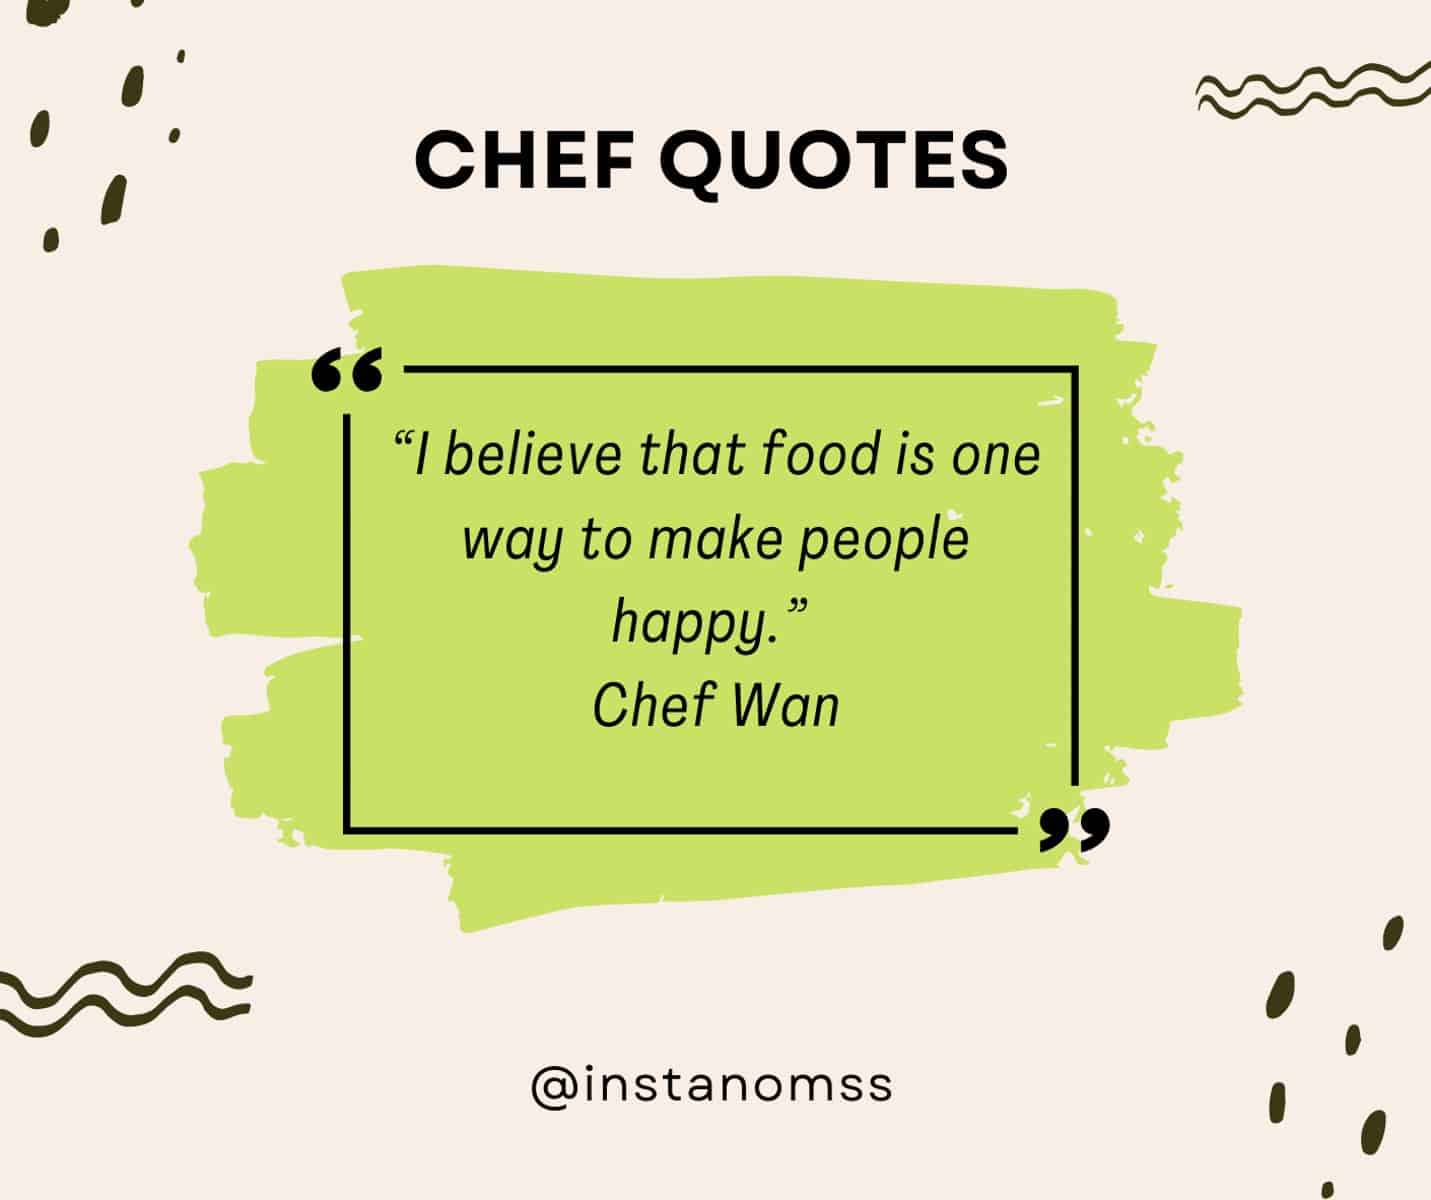 “I believe that food is one way to make people happy. I also believe that food can unite people from all walks of life and cultures. When we sit together and eat, we promote better understanding and harmony.Food brings love, peace and compassion to the table.” Chef Wan